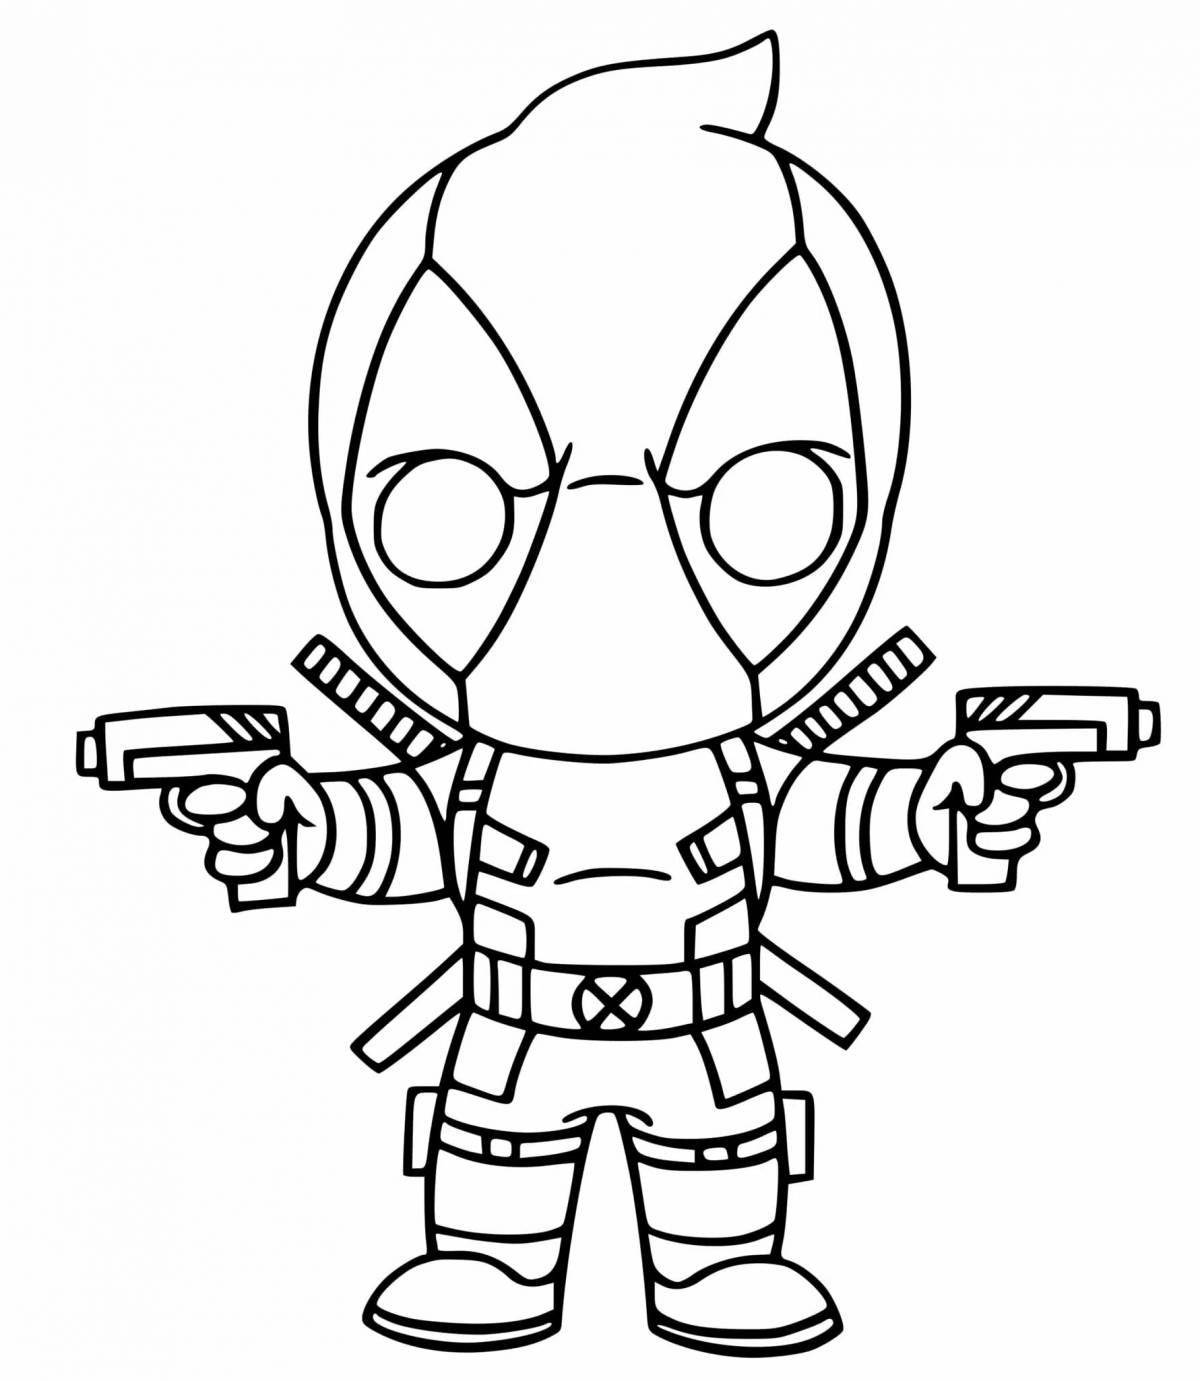 Fun coloring book for kids Deadpool and Spiderman